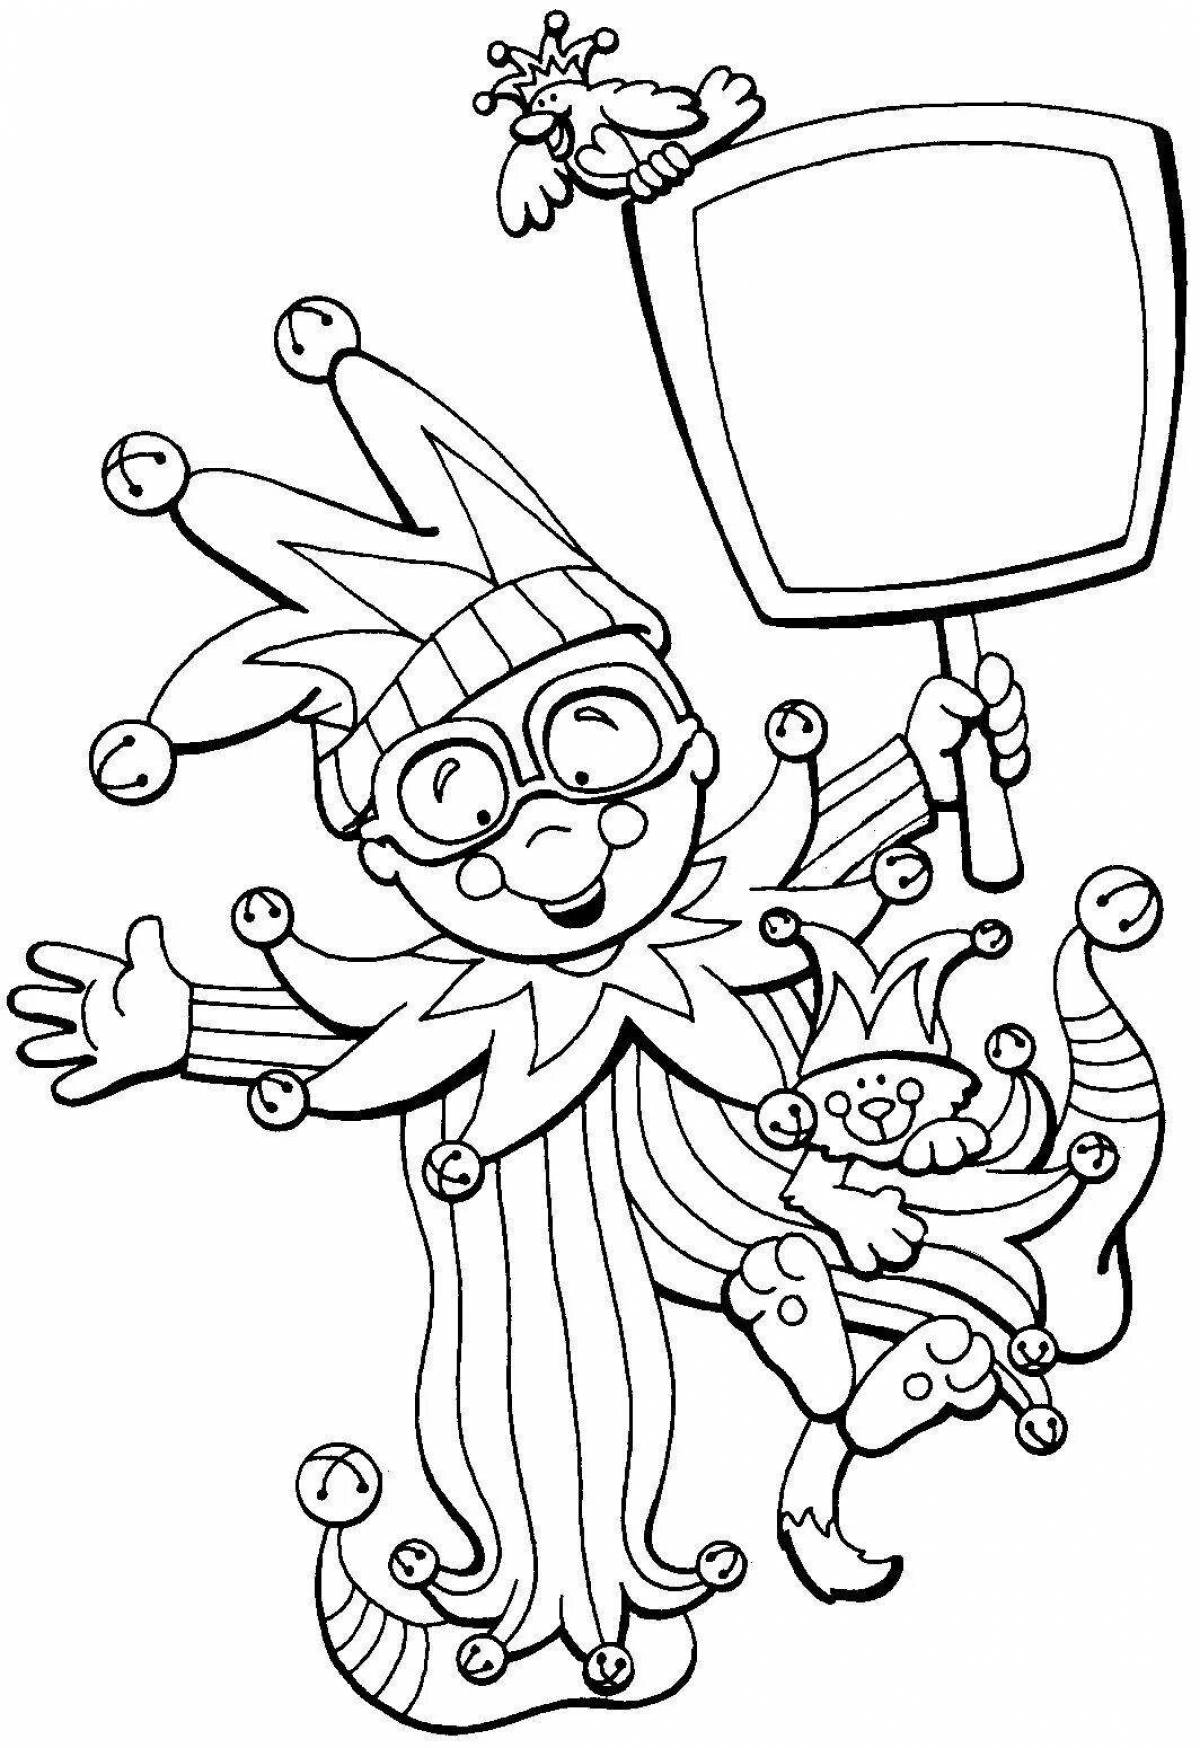 Coloring page beautiful puppet theater